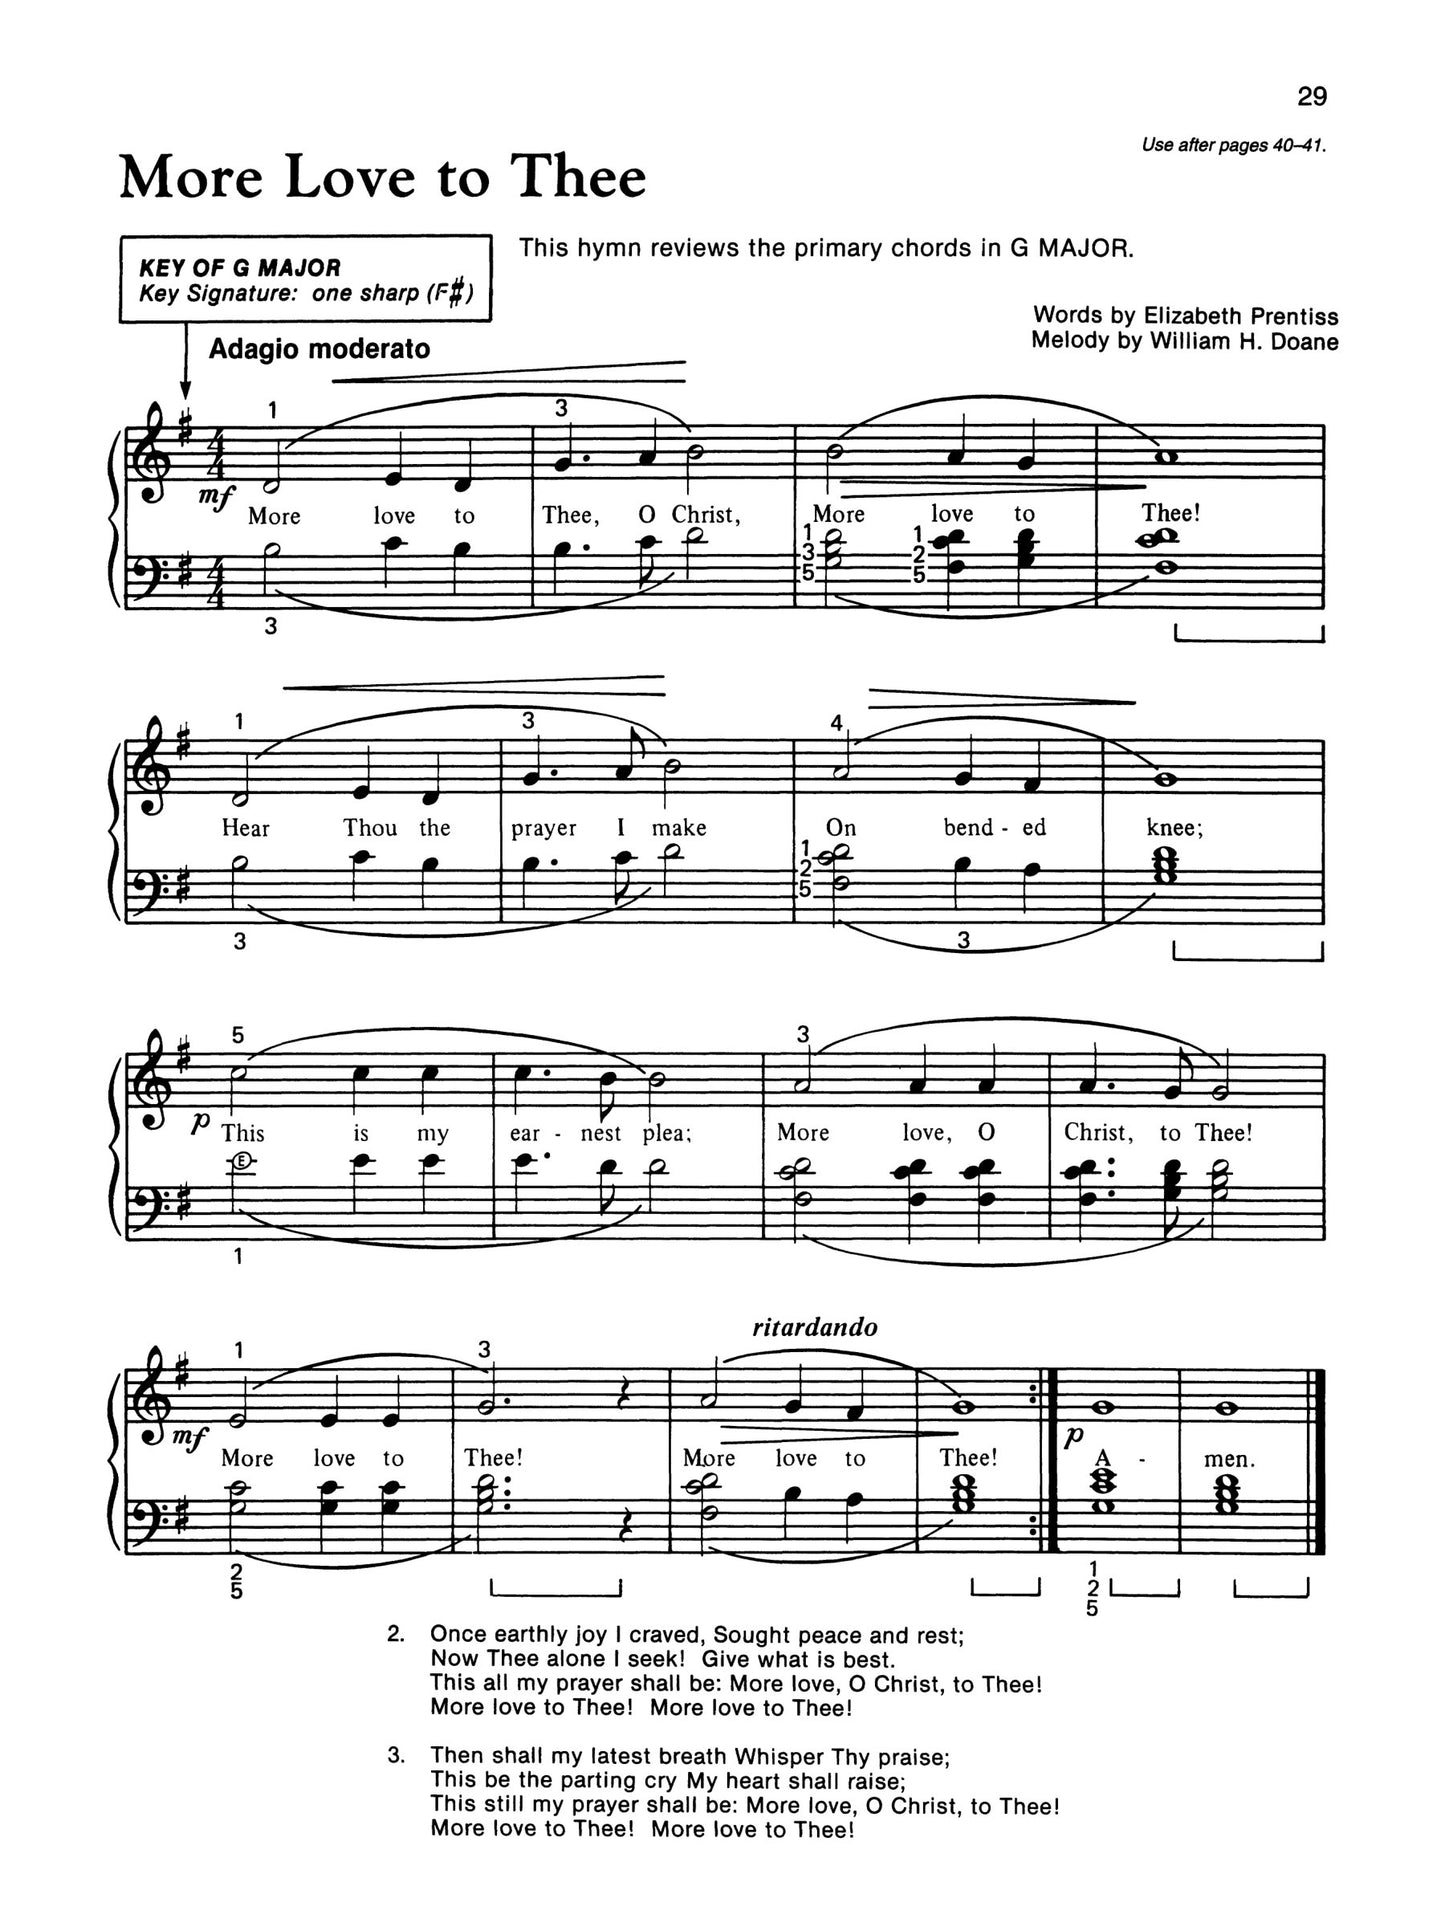 Alfred's Basic Piano Library - Hymn Book Complete Level 2 & 3